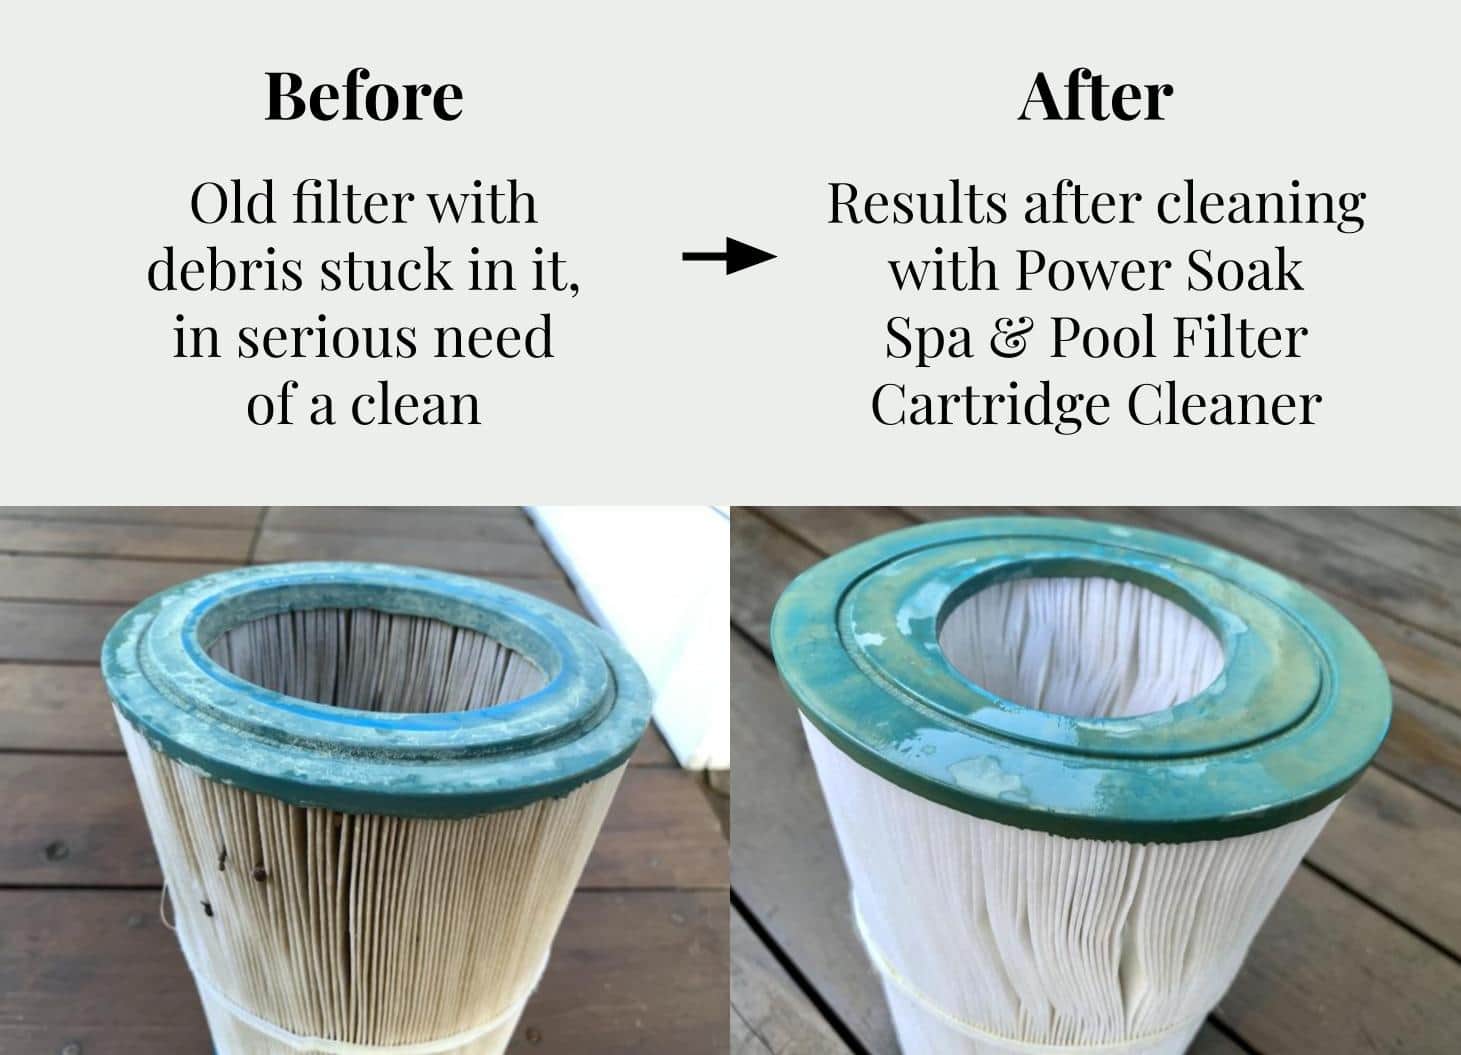 Power Soak filter cleaner before and after